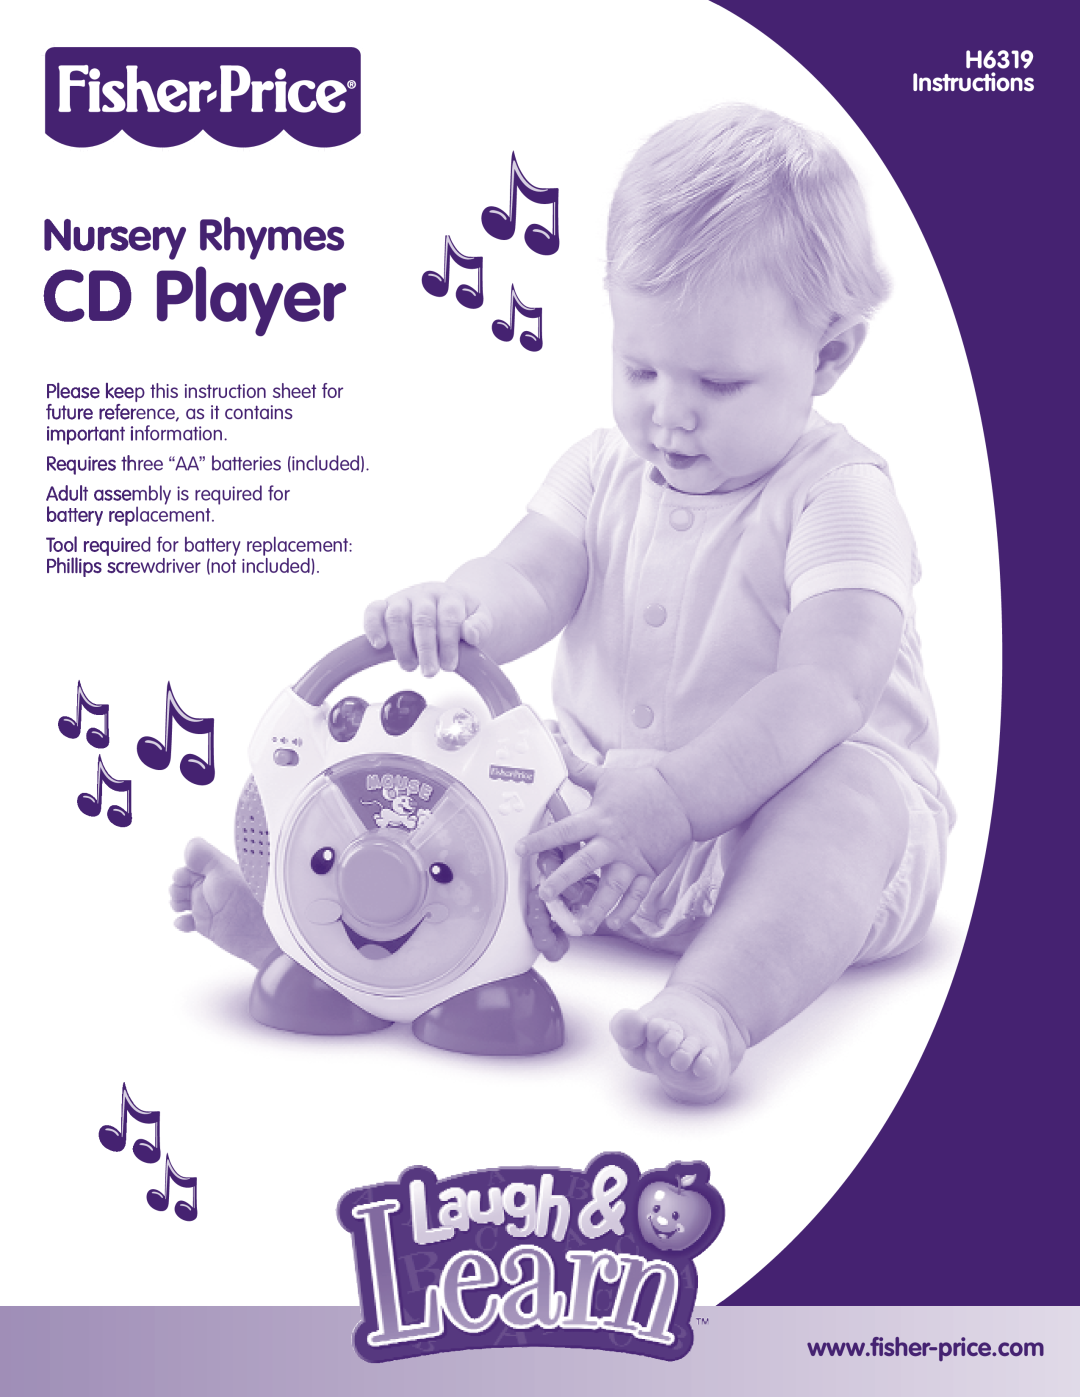 Fisher-Price instruction sheet CD Player, Nursery Rhymes, H6319 Instructions, Requires three “AA” batteries included 